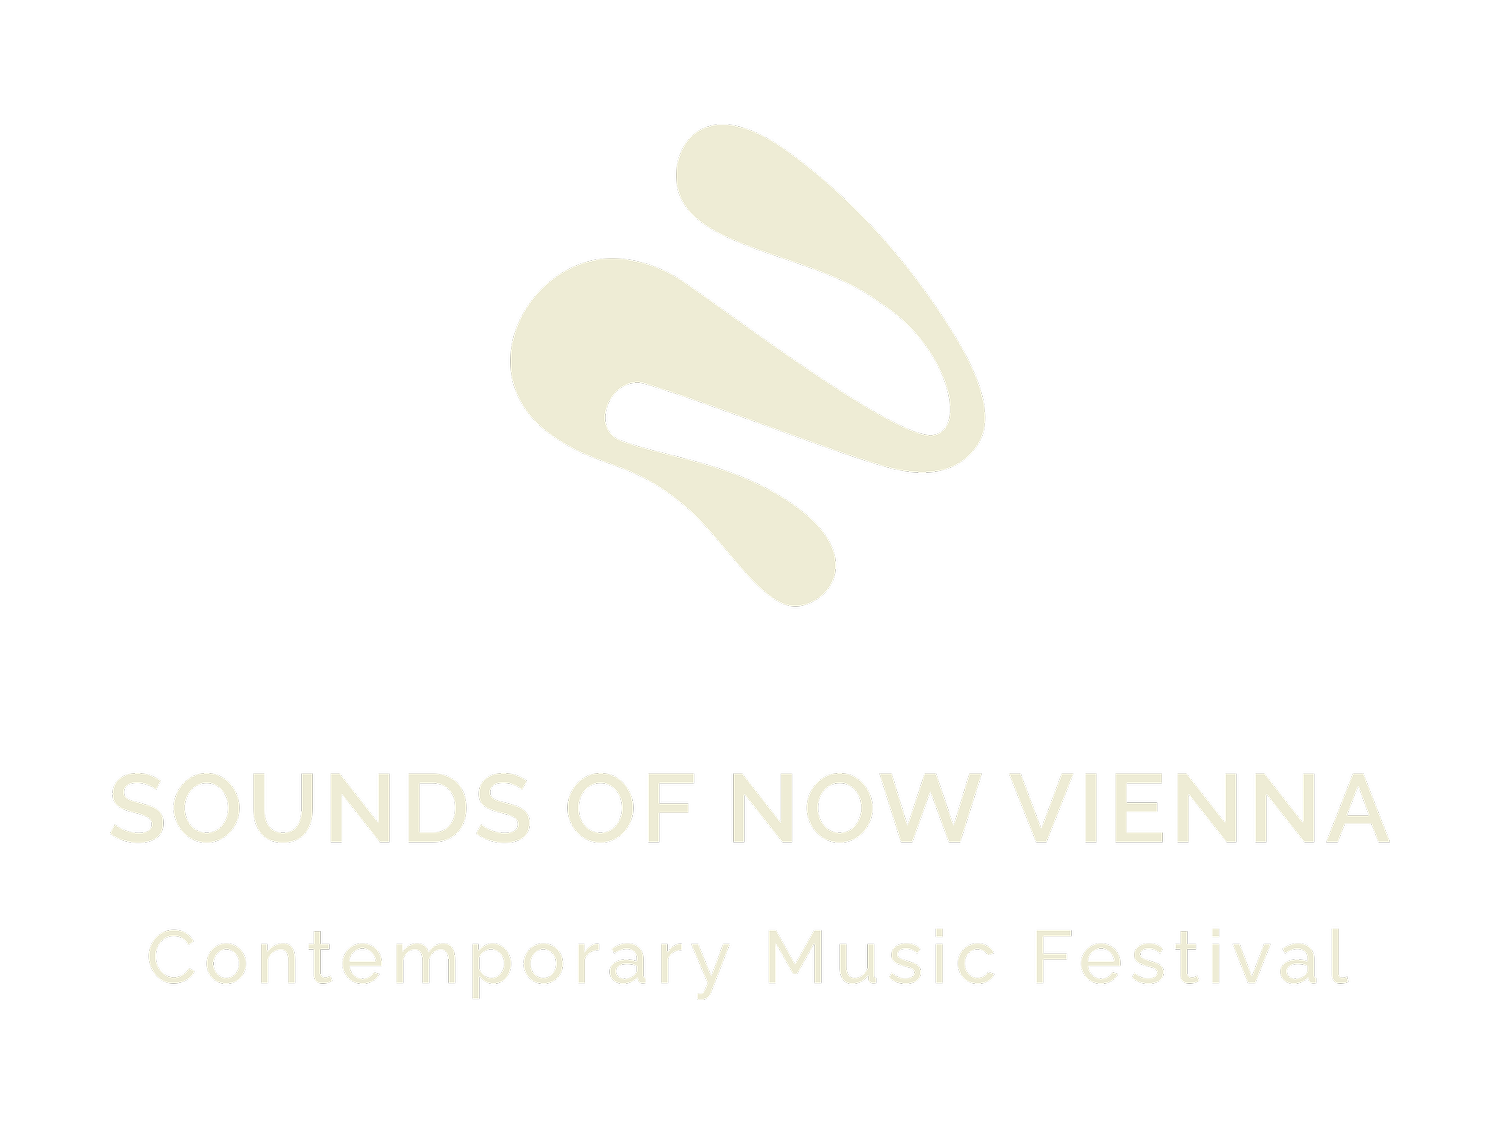 Sounds of Now Vienna